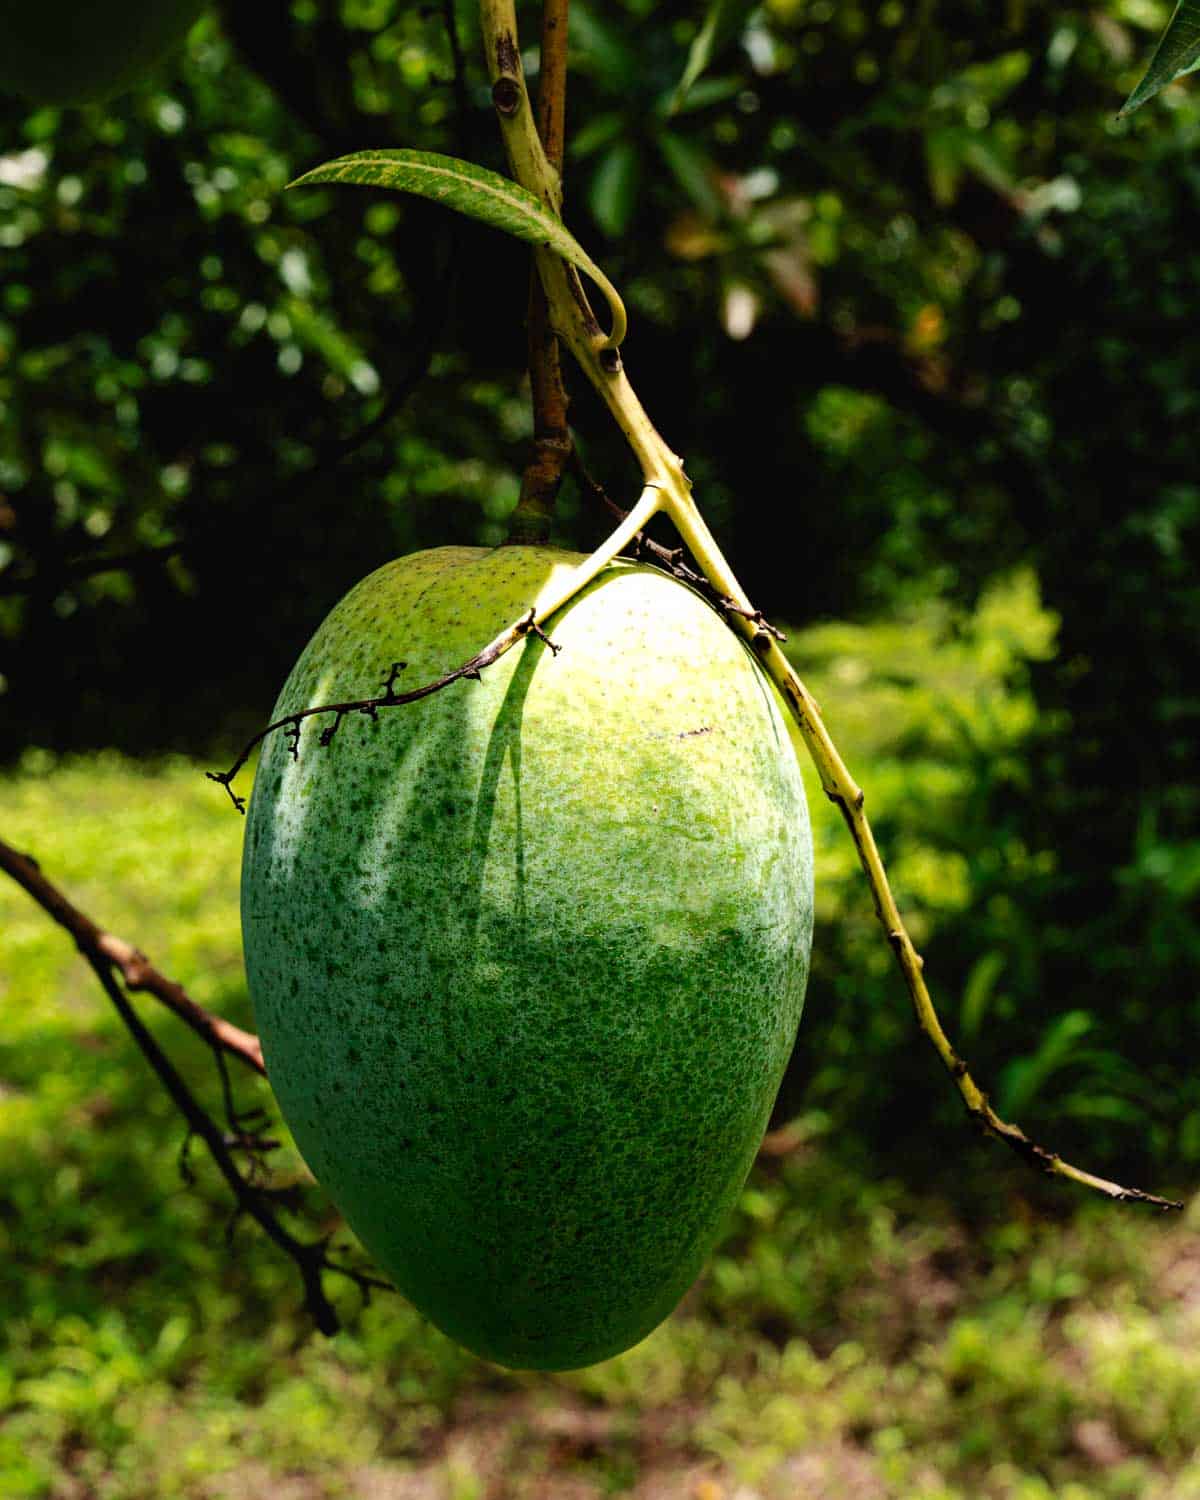 Avocado growing on a tree in Florida.